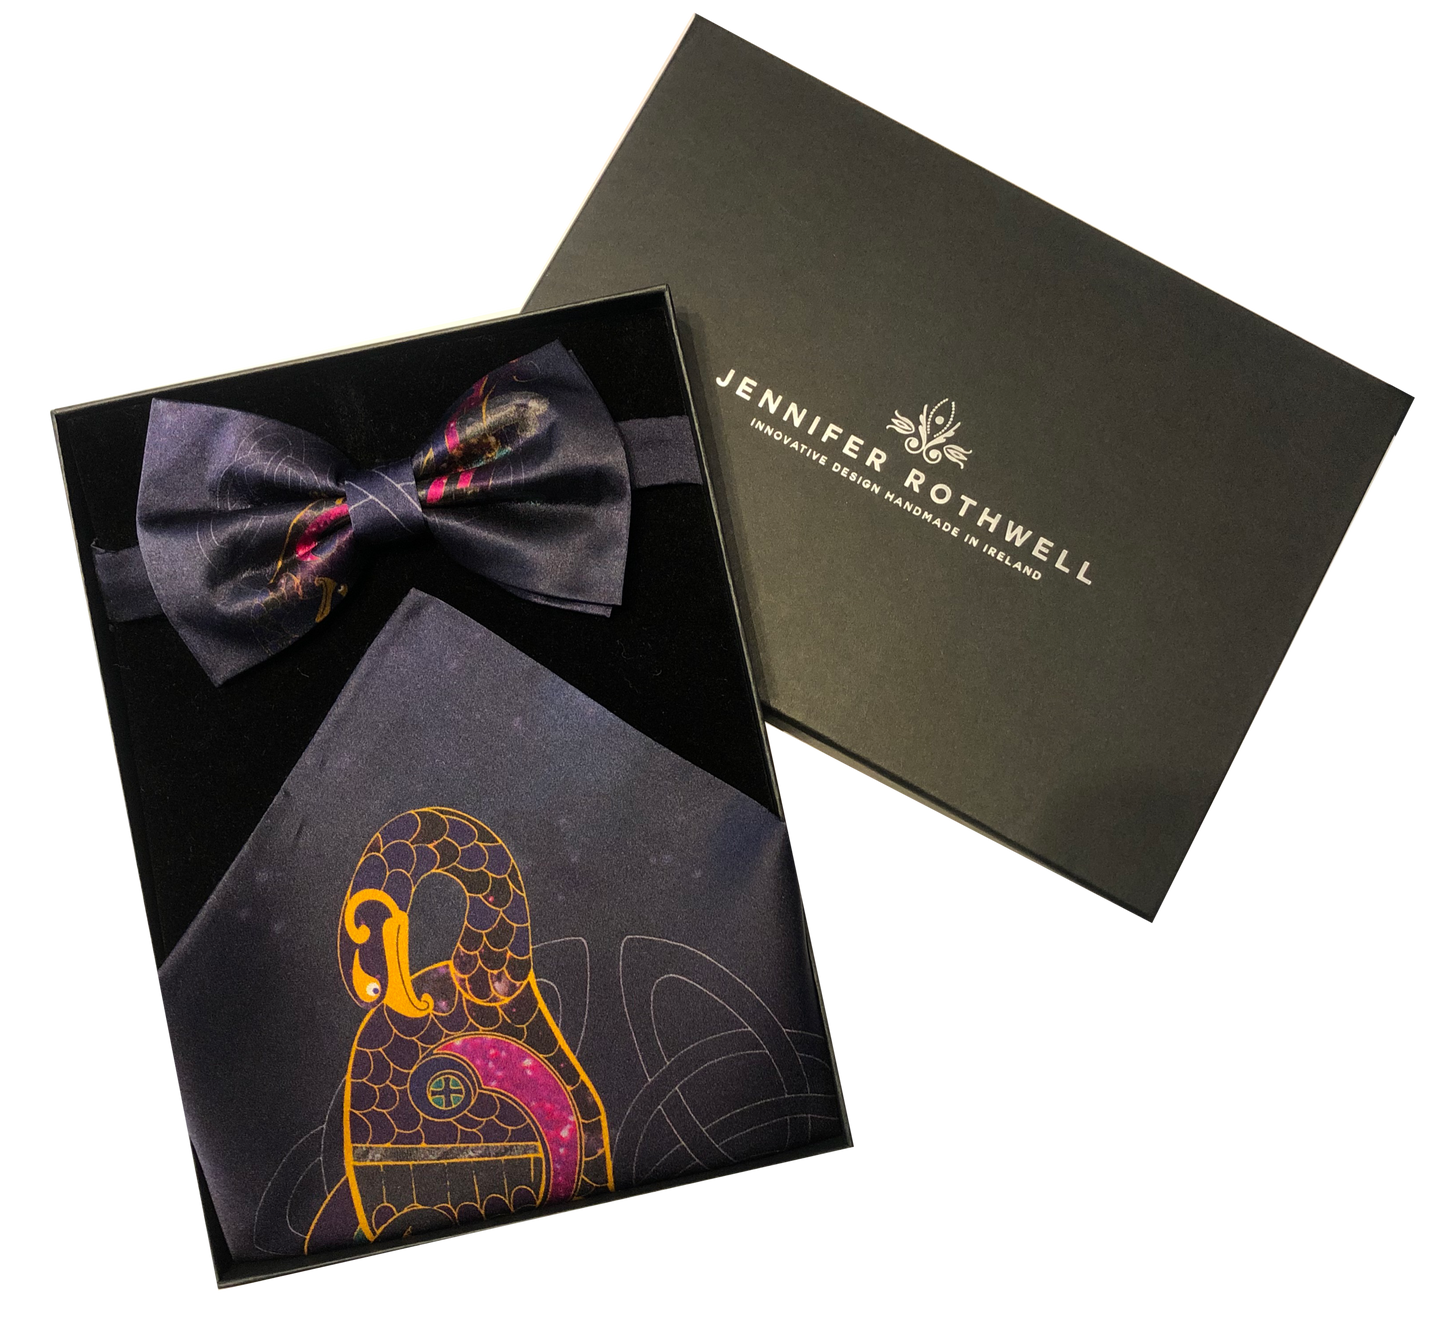 Book of Kells Bow Tie and Pocket Square